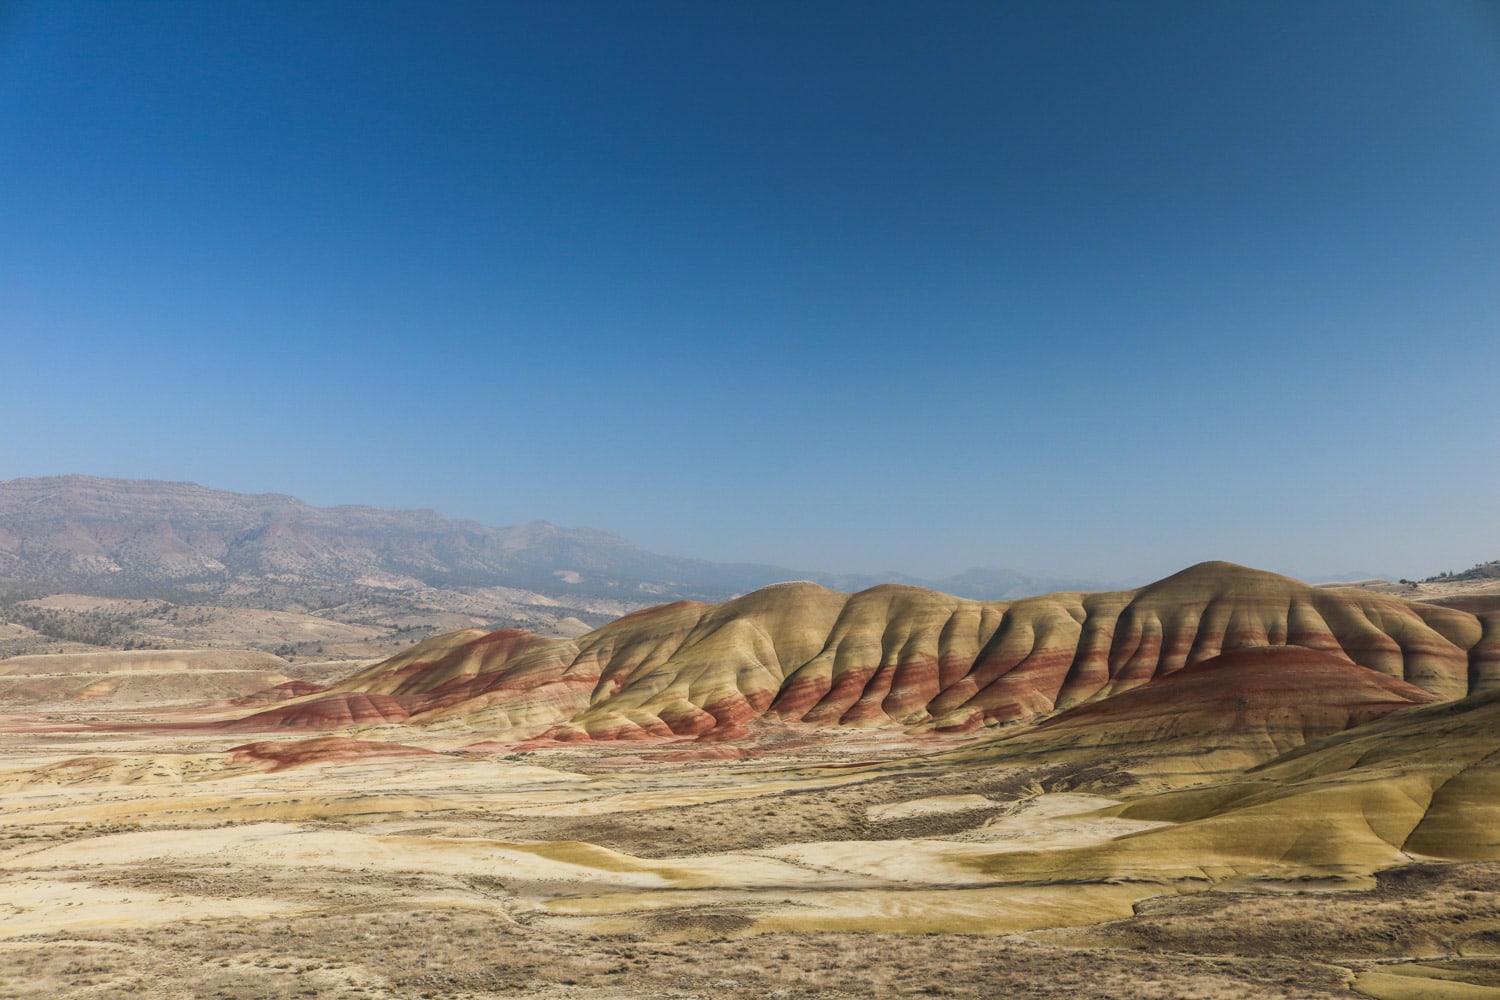 Painted Hills, John Day Fossil Beds National Monument, Oregon - Best National Parks with Fossils